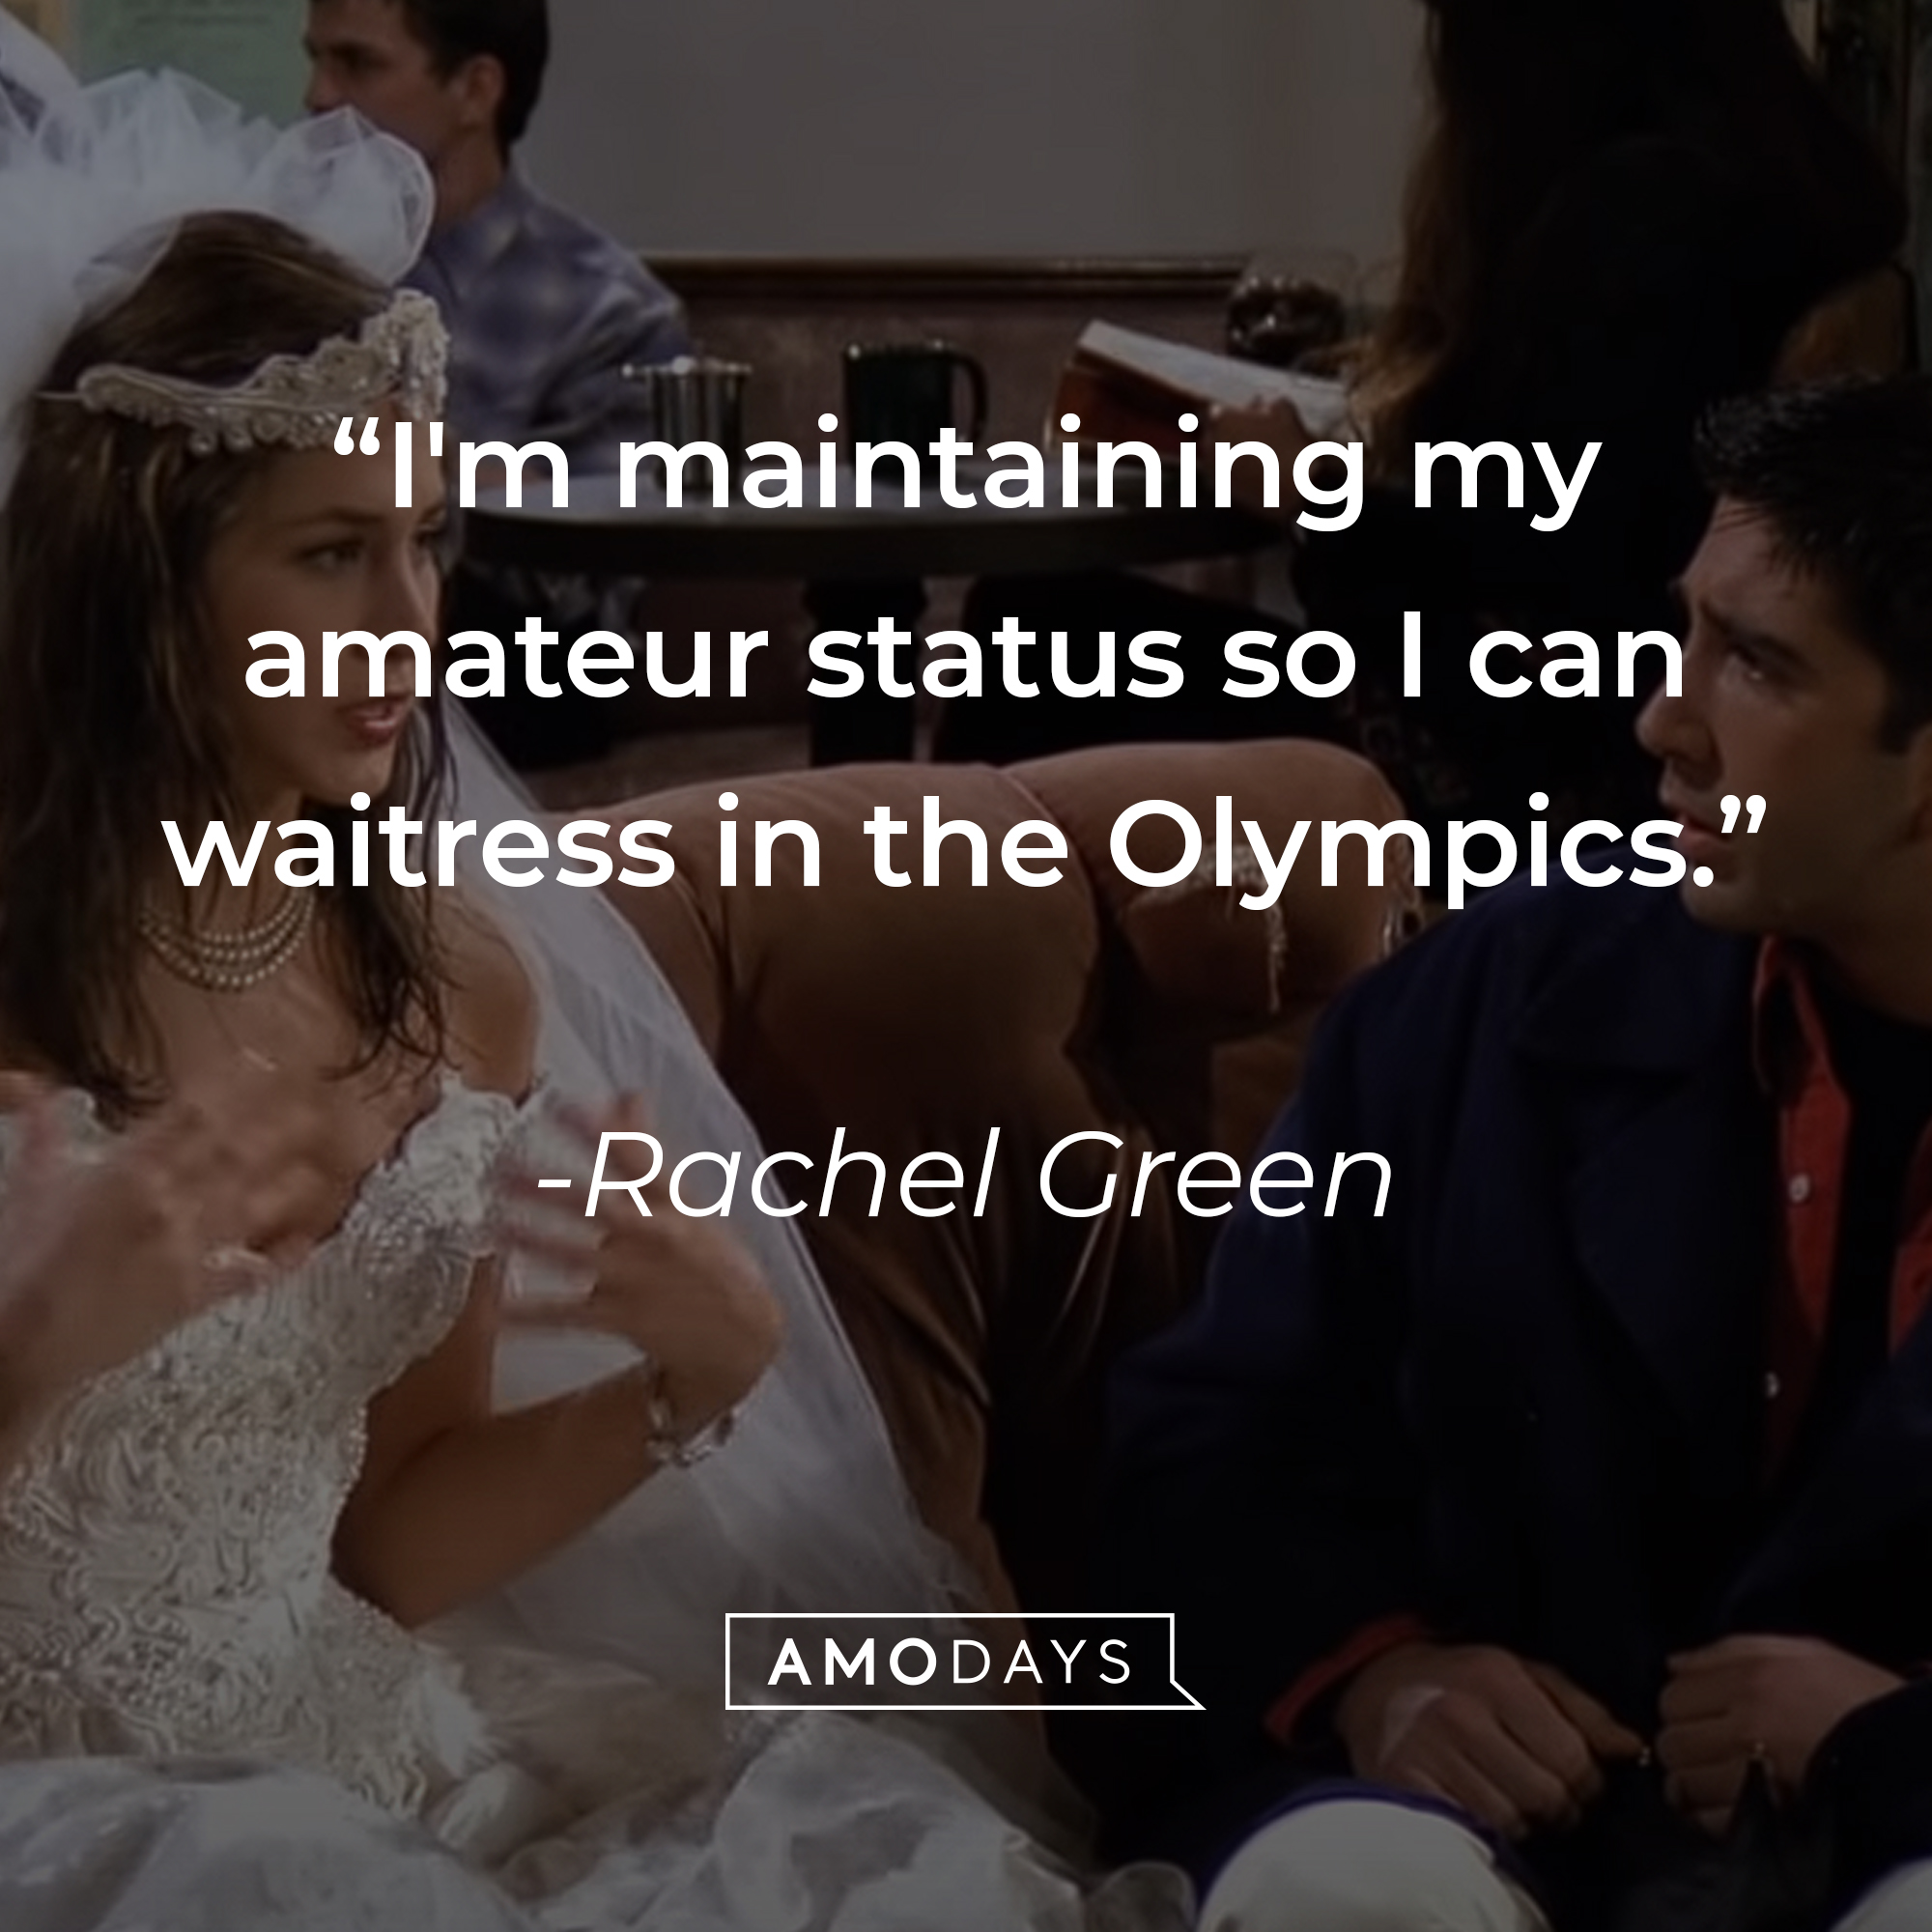 Rachel Green's quote: "I'm maintaining my amateur status so I can waitress in the Olympics." | Source: youtube.com/warnerbrostv